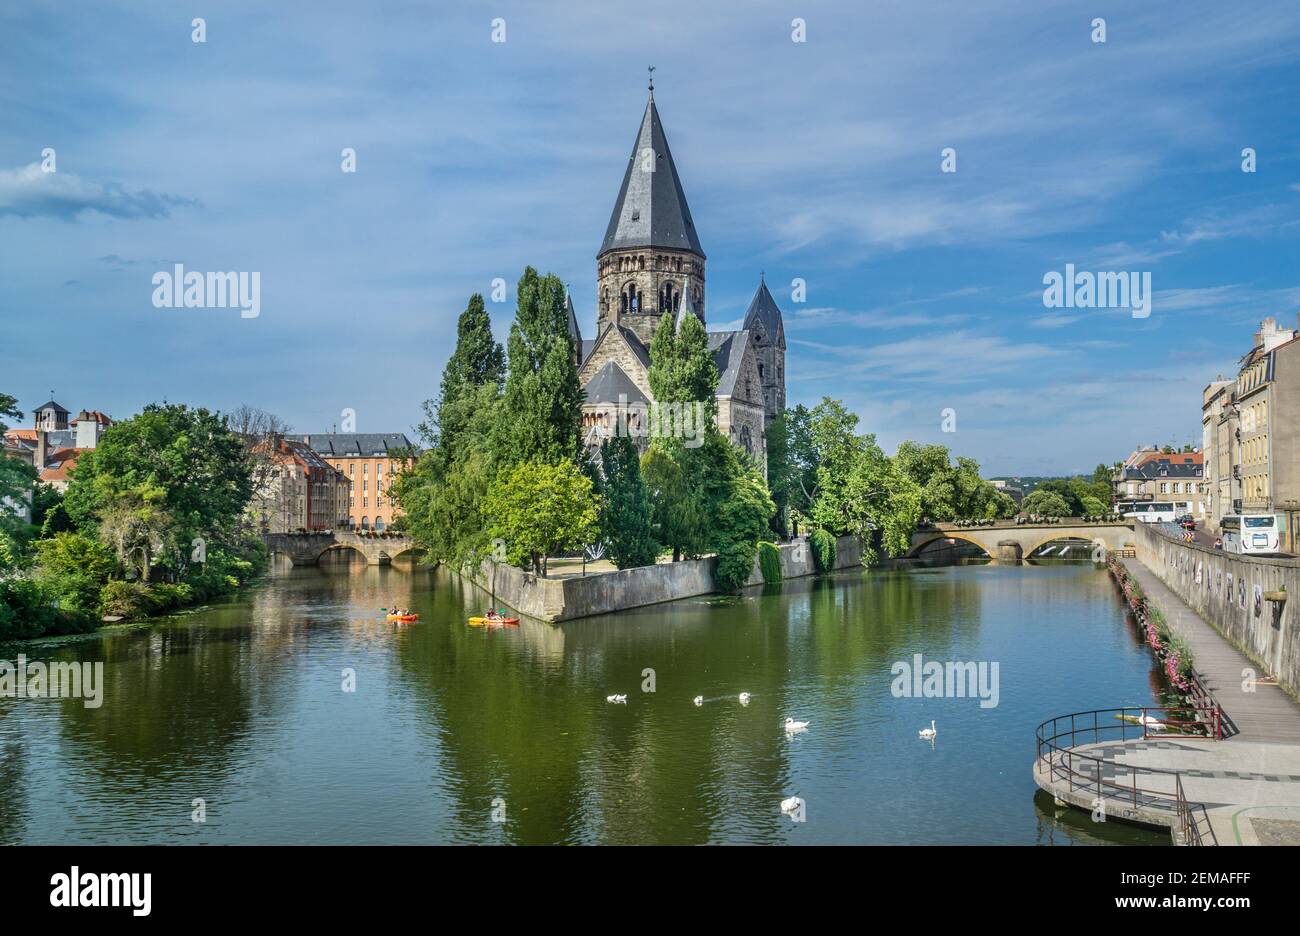 view of the iconic Protestant church Temple Neuf on the Moselle river in Metz, Lorraine, Moselle department, Grand Est region, France Stock Photo